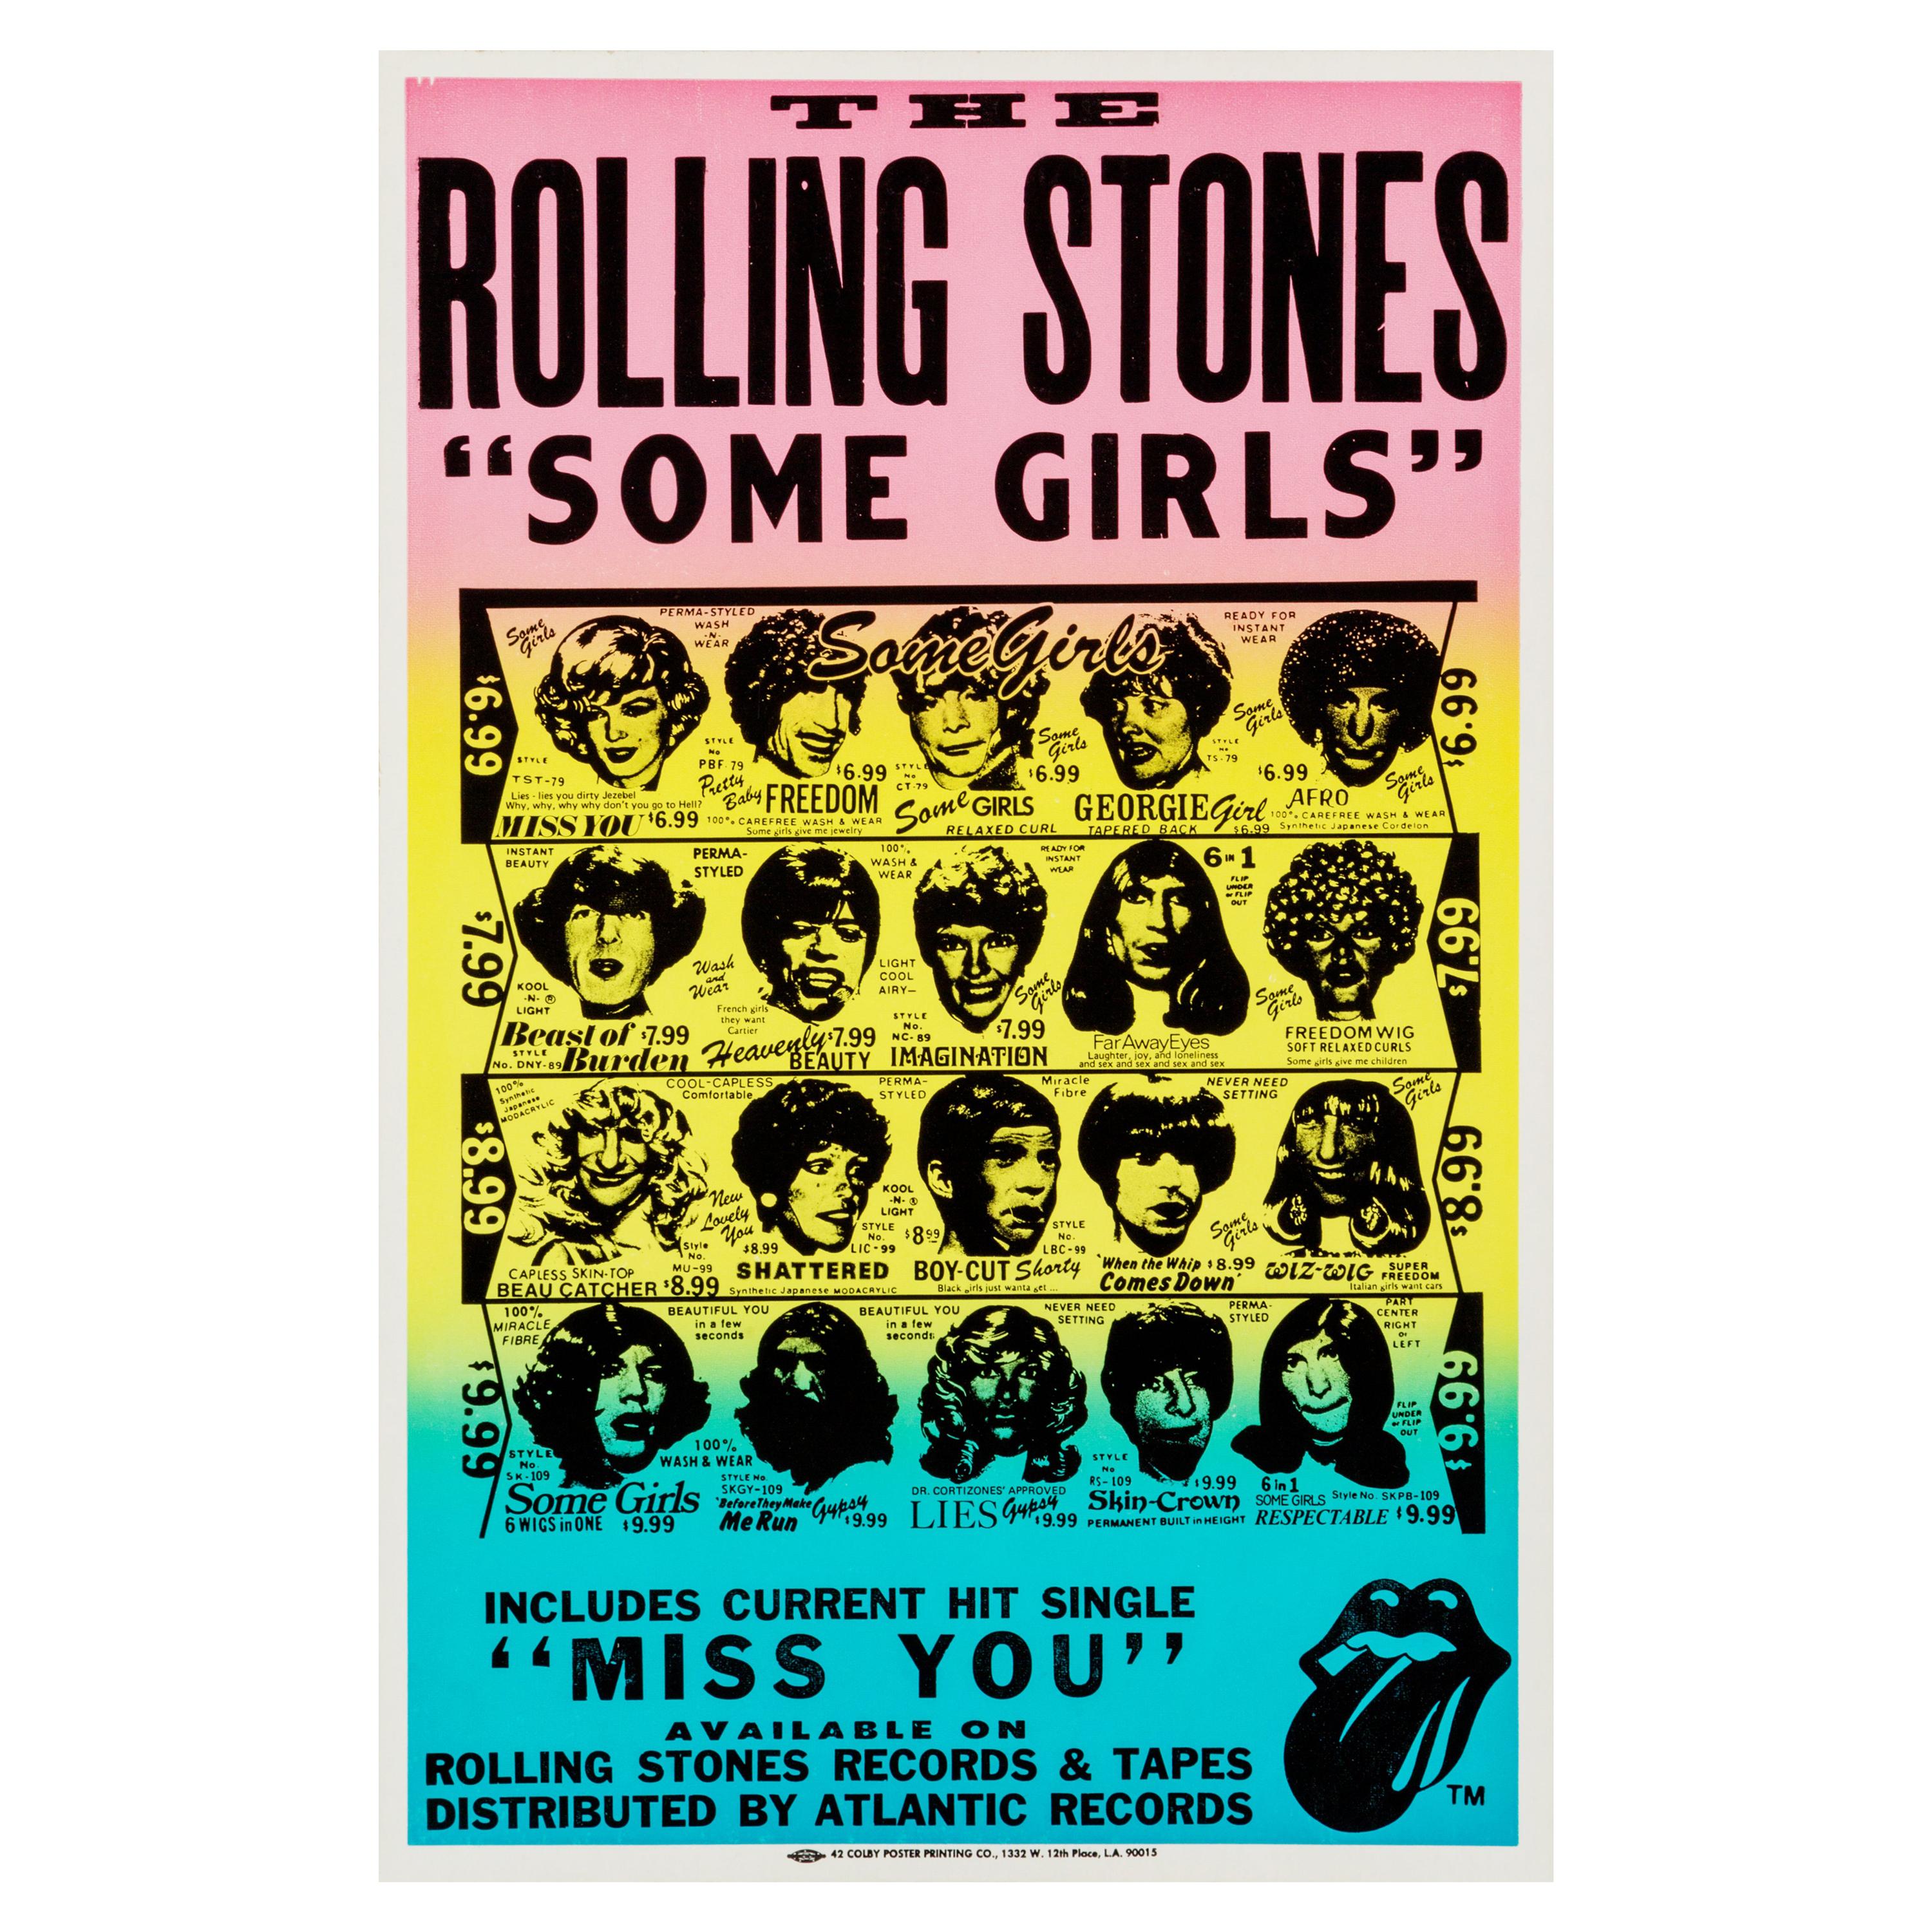 The Rolling Stones "Some Girls" Original Vintage Promo Poster, American, 1978